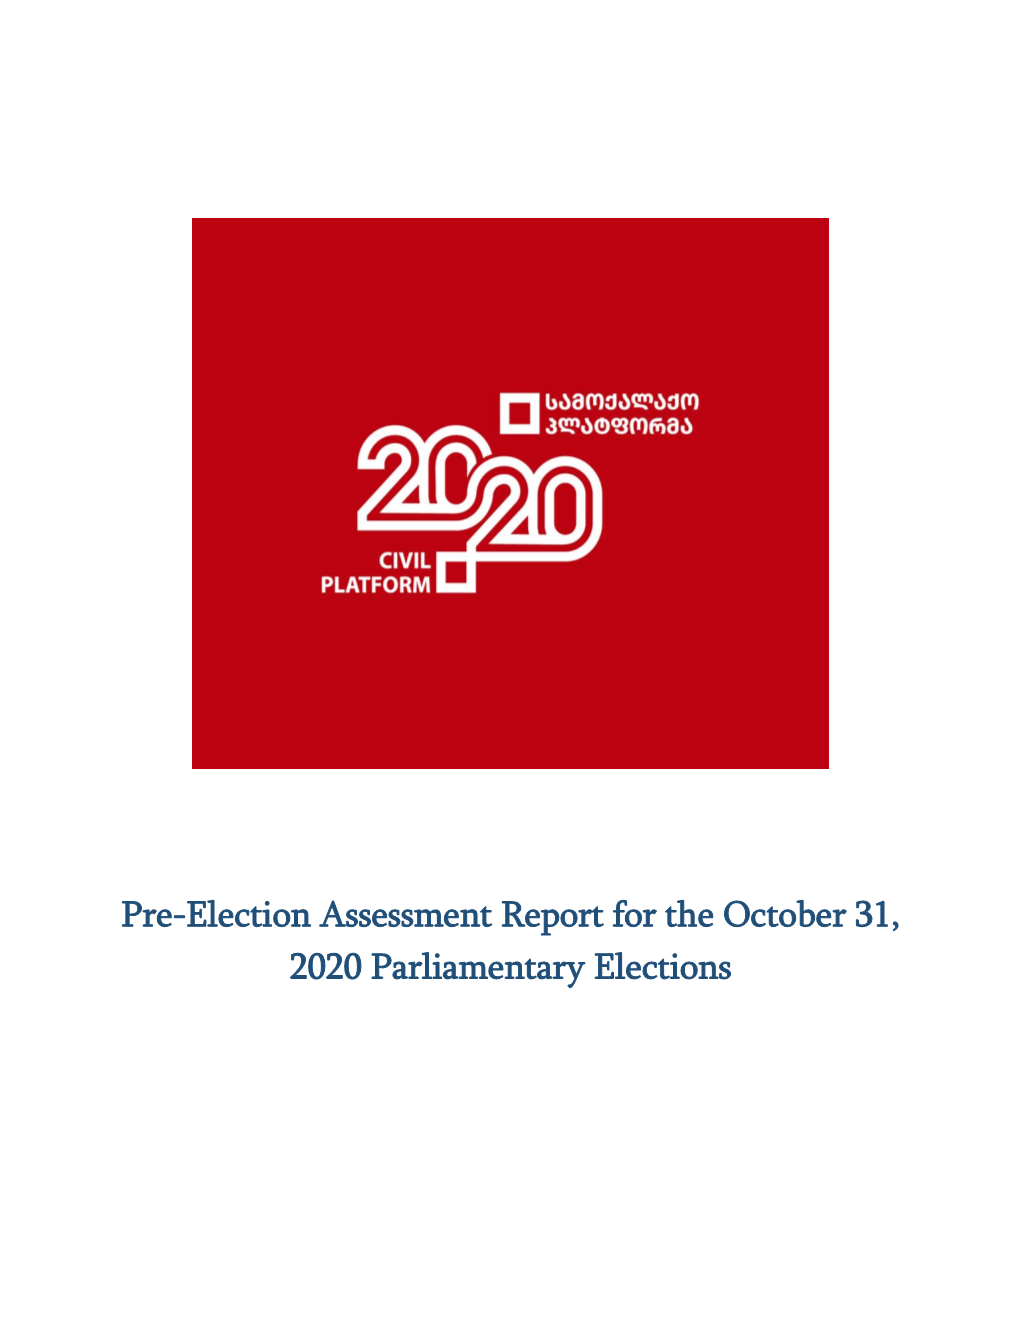 Pre-Election Assessment Report for the October 31, 2020 Parliamentary Elections